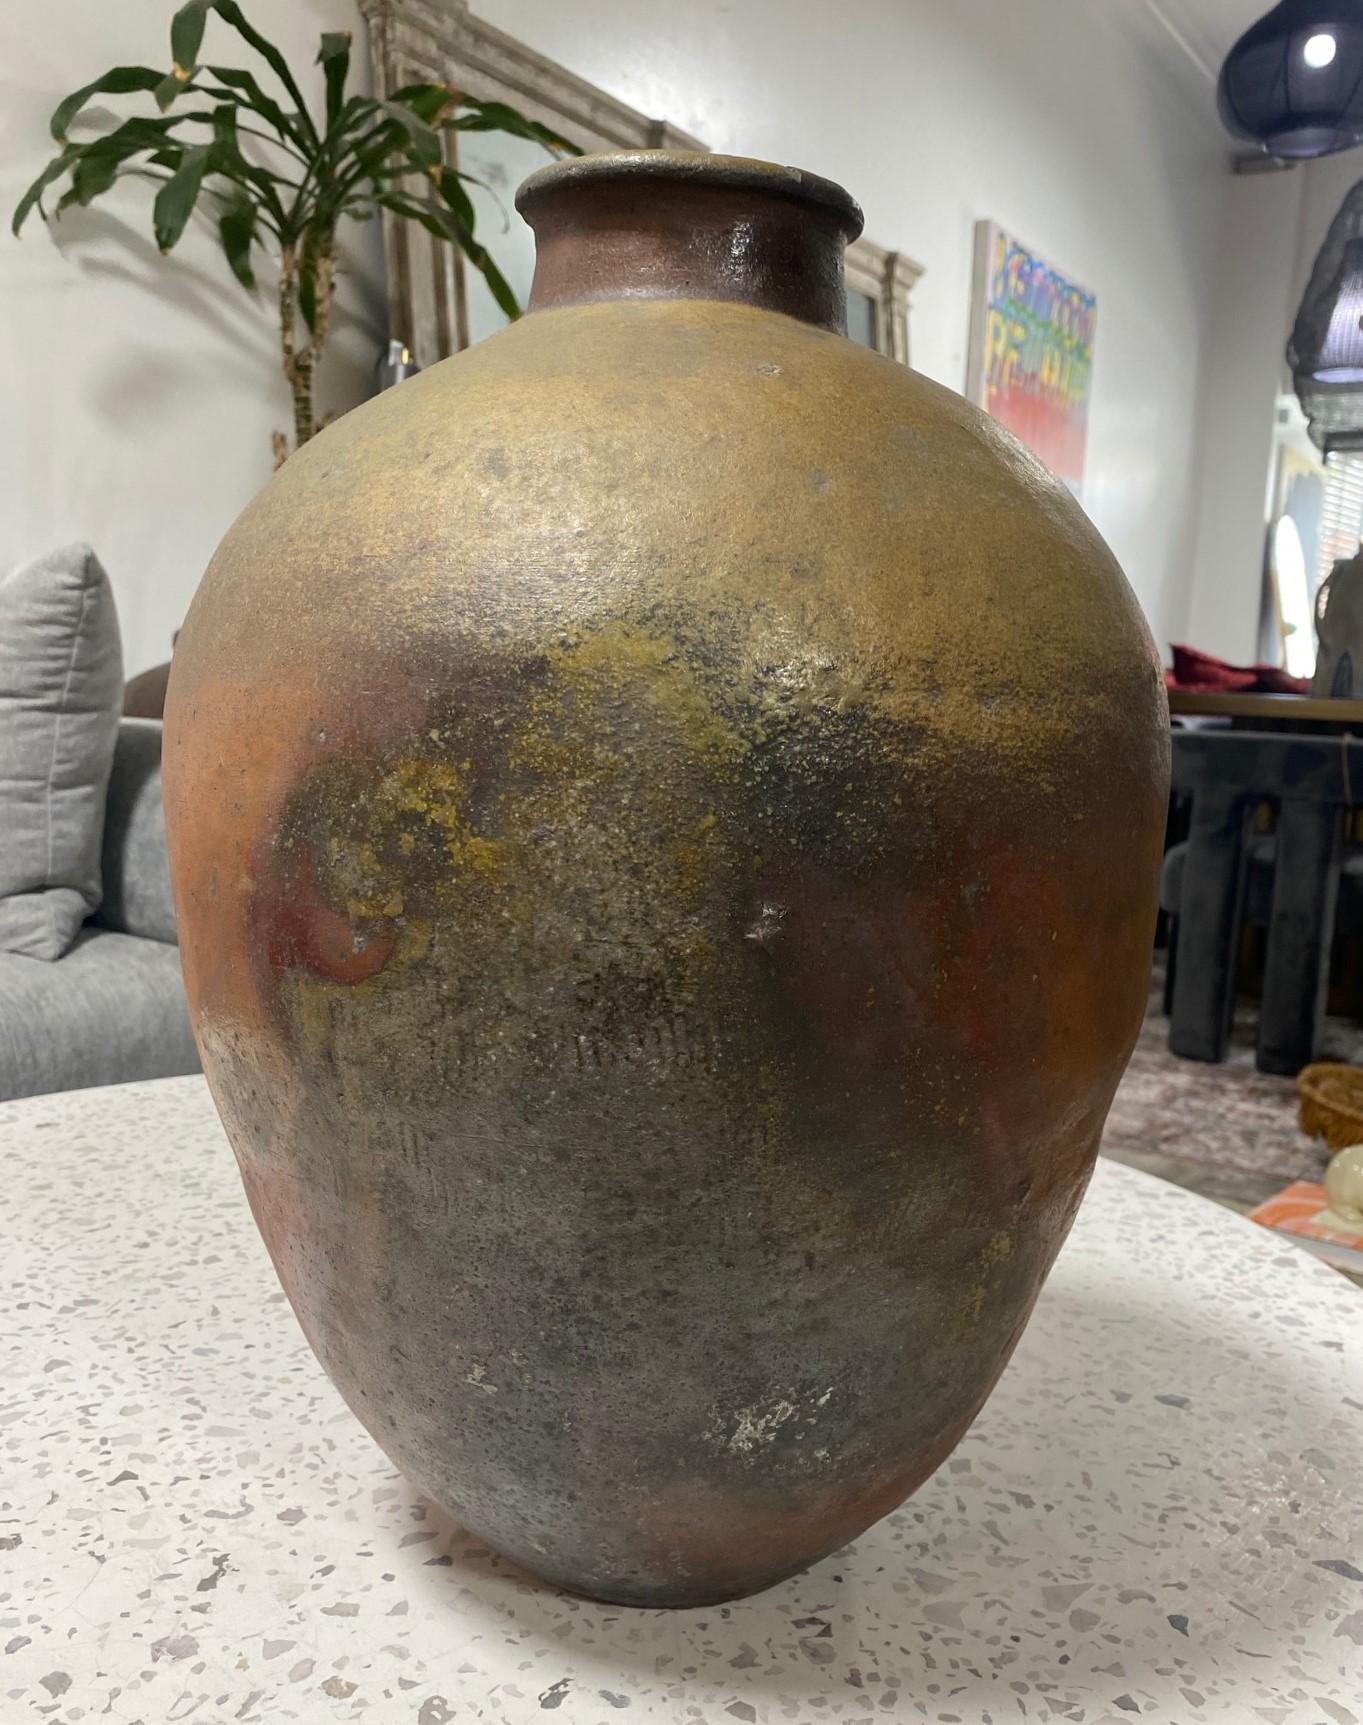 An absolutely stunning Bizen ware stoneware vase/tsubo jar/vessel - produced sometime during the mid to late Edo period (1603-1867). Bizen yaki ware is a type of Japanese pottery traditionally from the Bizen province, presently a part of Okayama